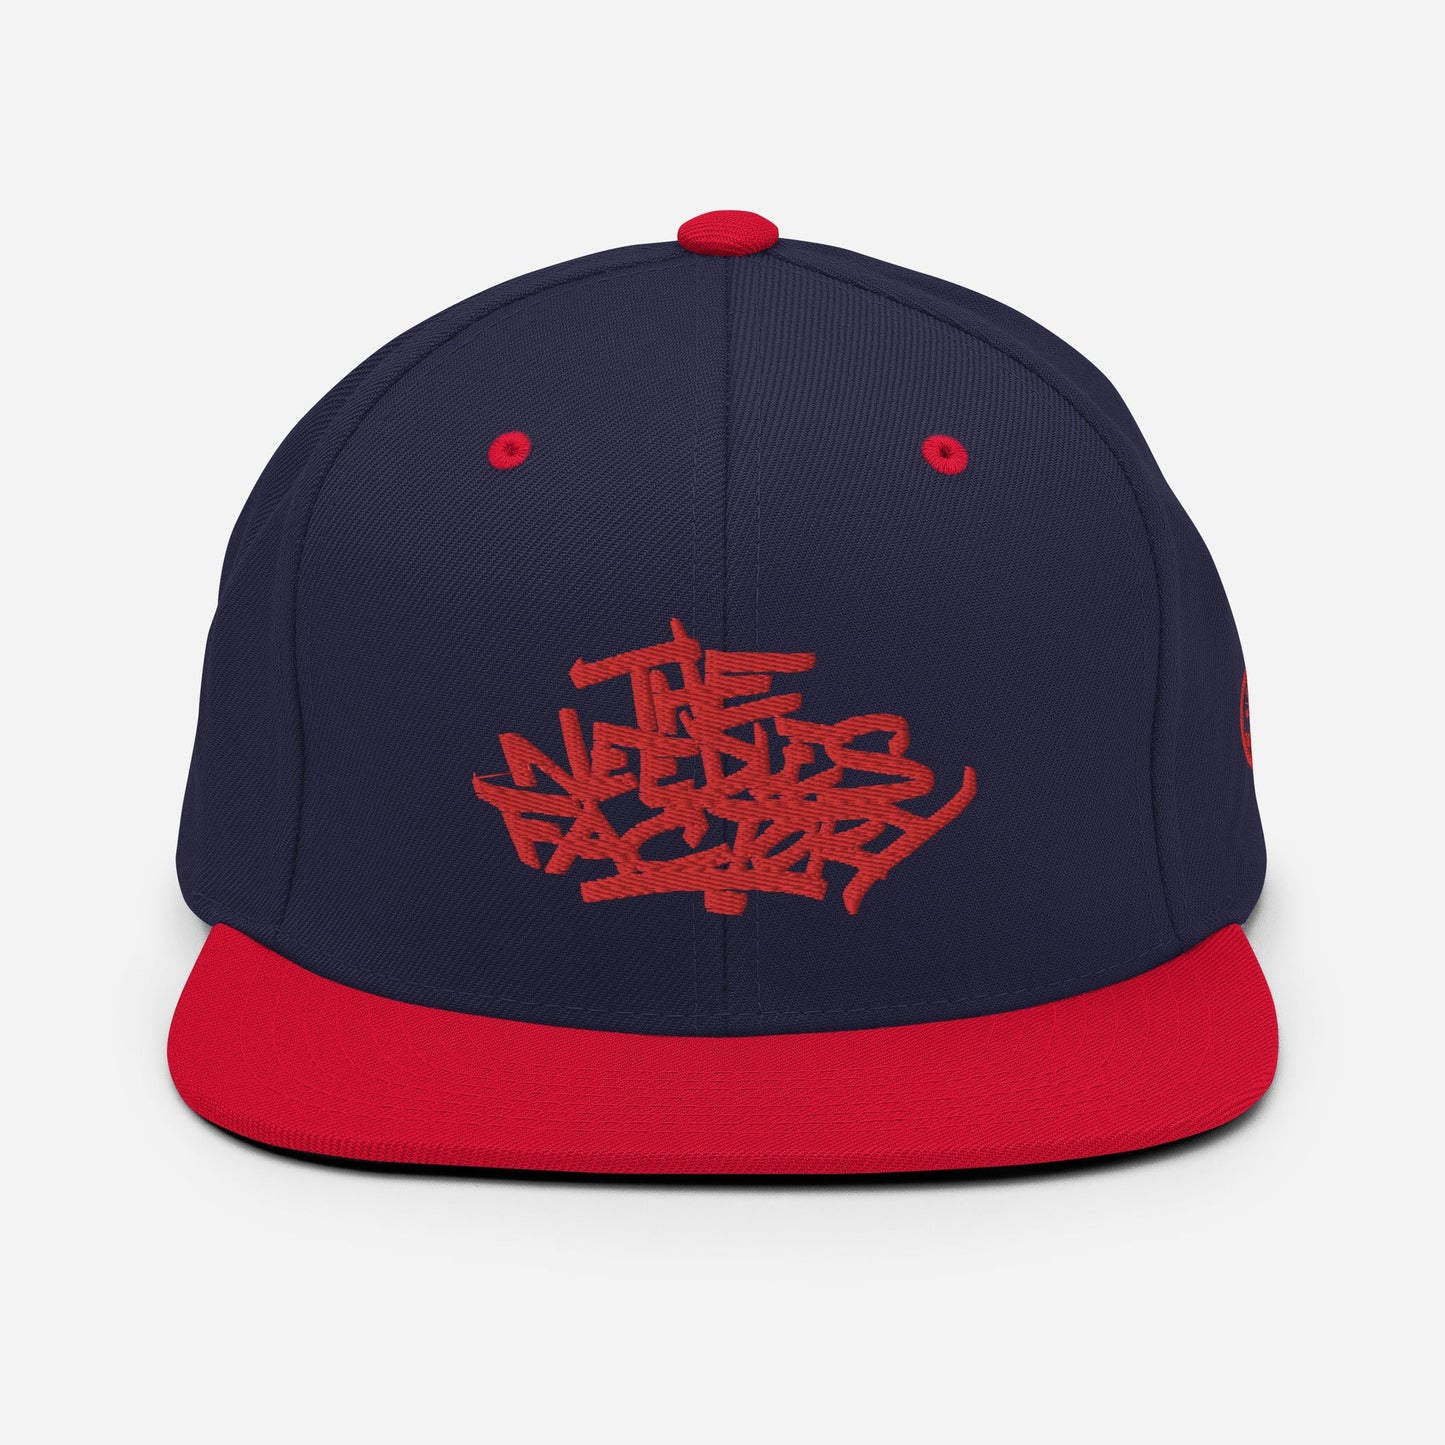 Casquette Snapback Brodé rouge Lettring The Needles Factory Free Shipping - The Needles Factory